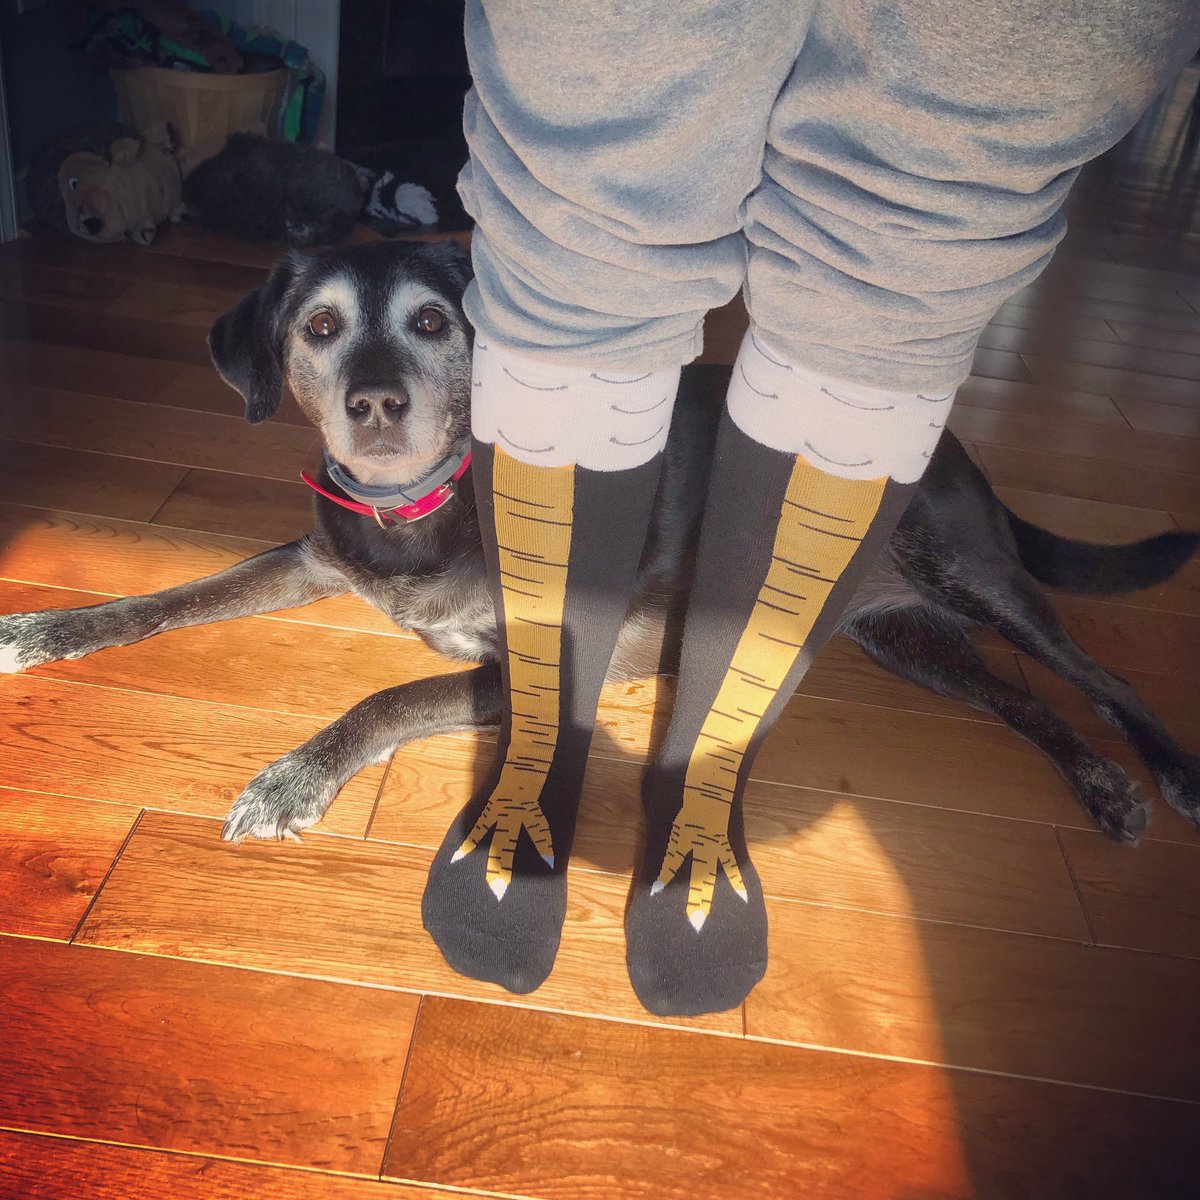 Just over here “sockin’ it to coronavirus” with my best pup! #booboodog #crazysockday #iamCuCPS